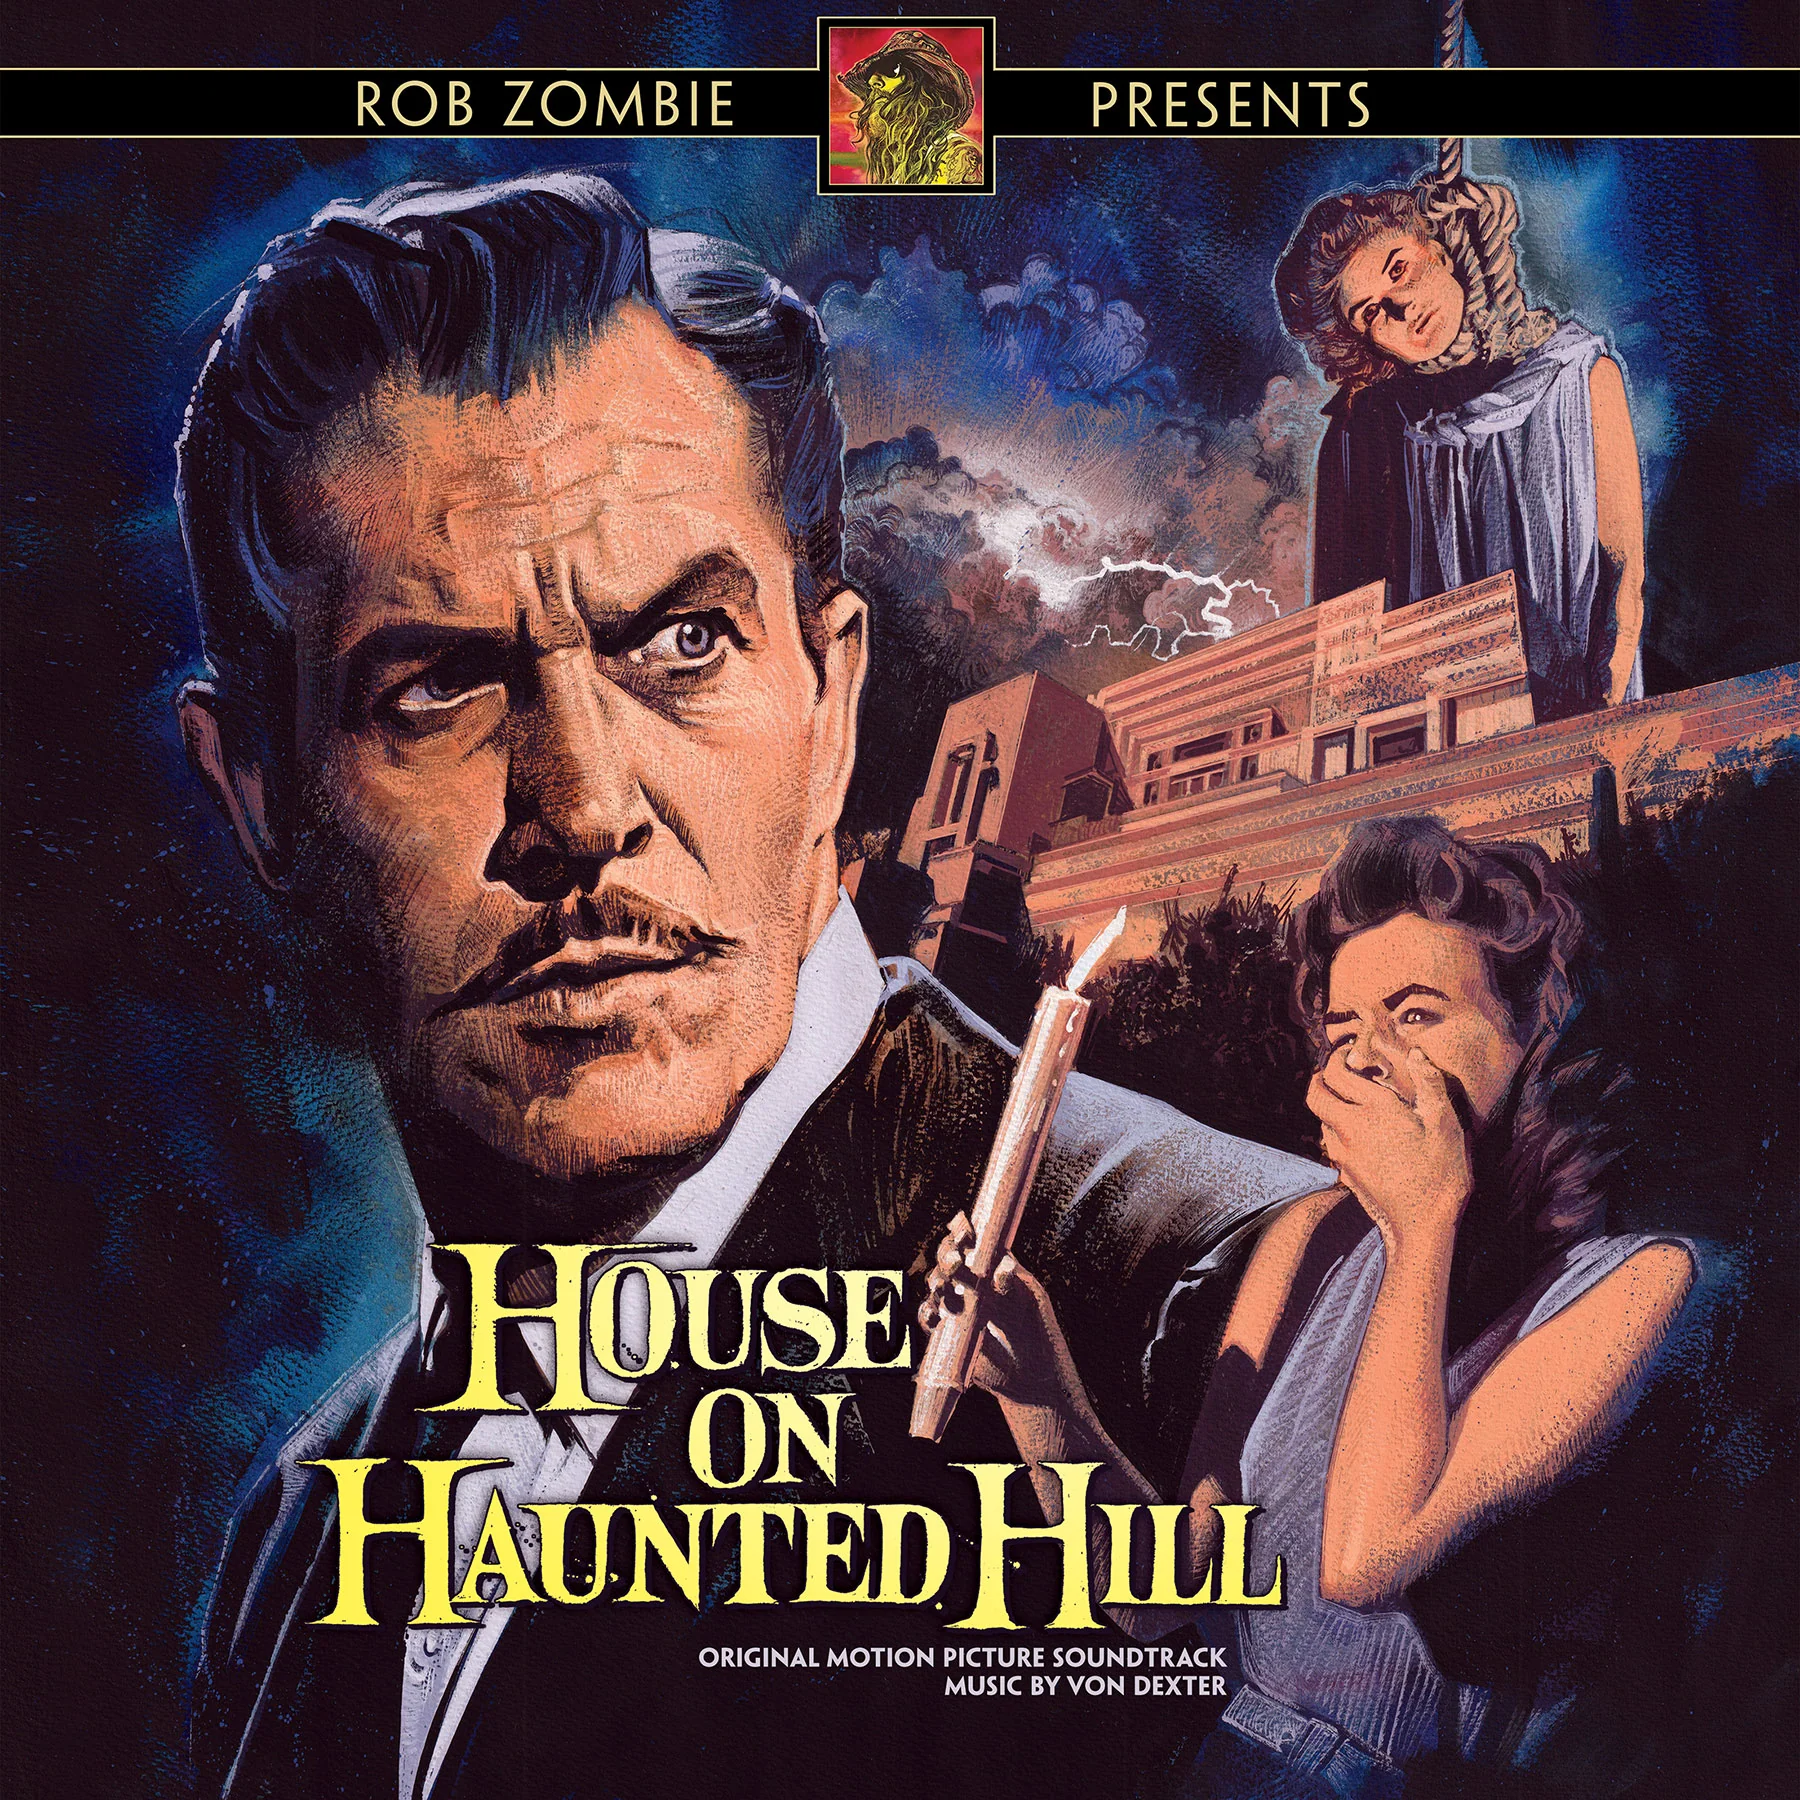 Rob Zombie Presents House On Haunted Hill LP Release